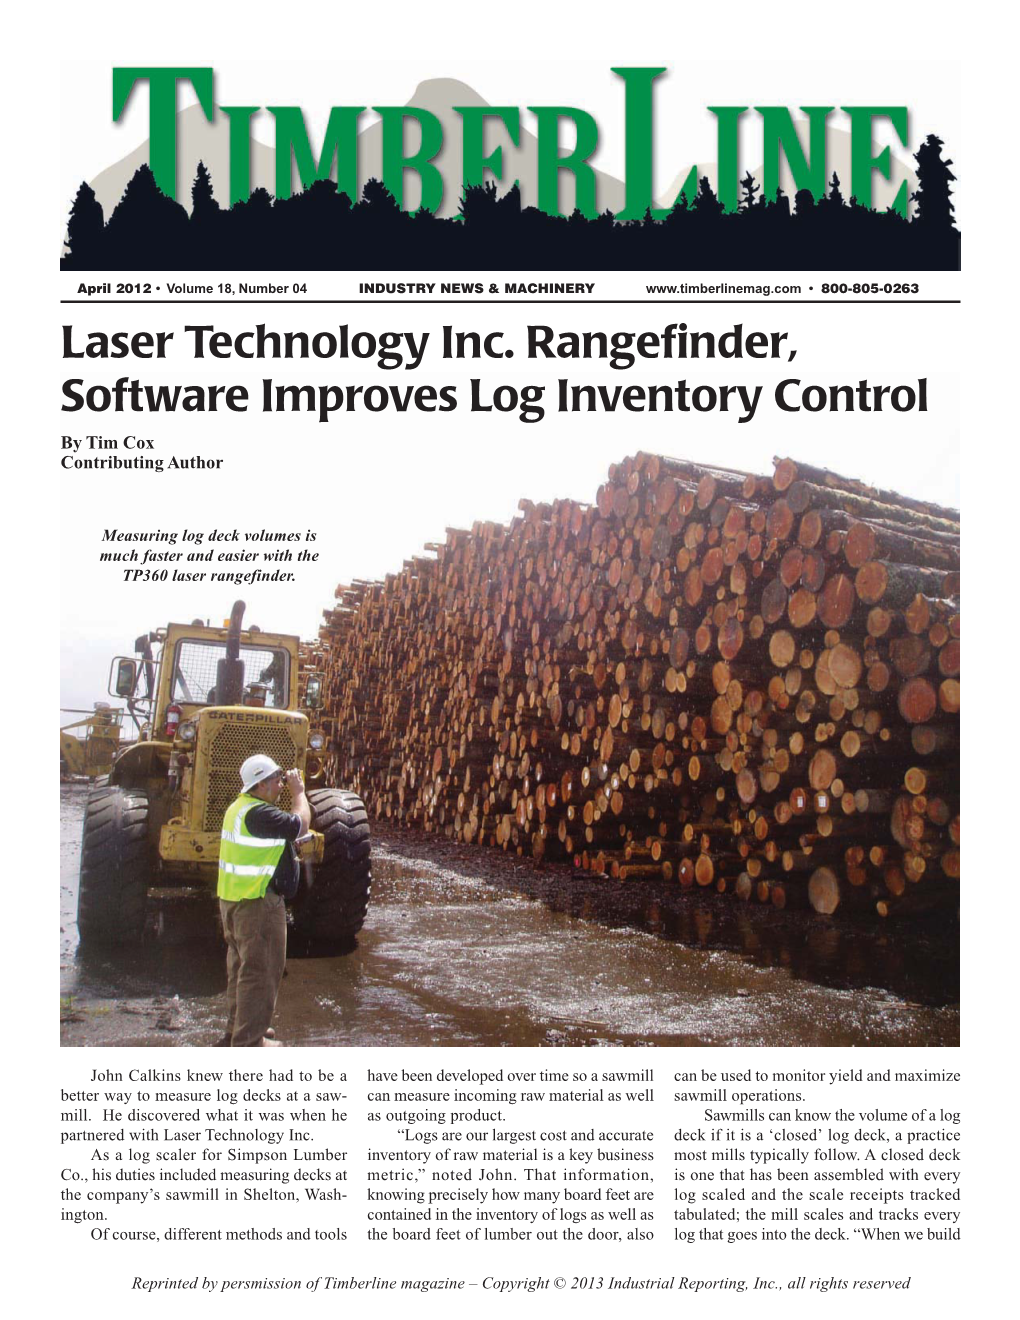 Laser Technology Inc. Rangefinder, Software Improves Log Inventory Control by Tim Cox Contributing Author